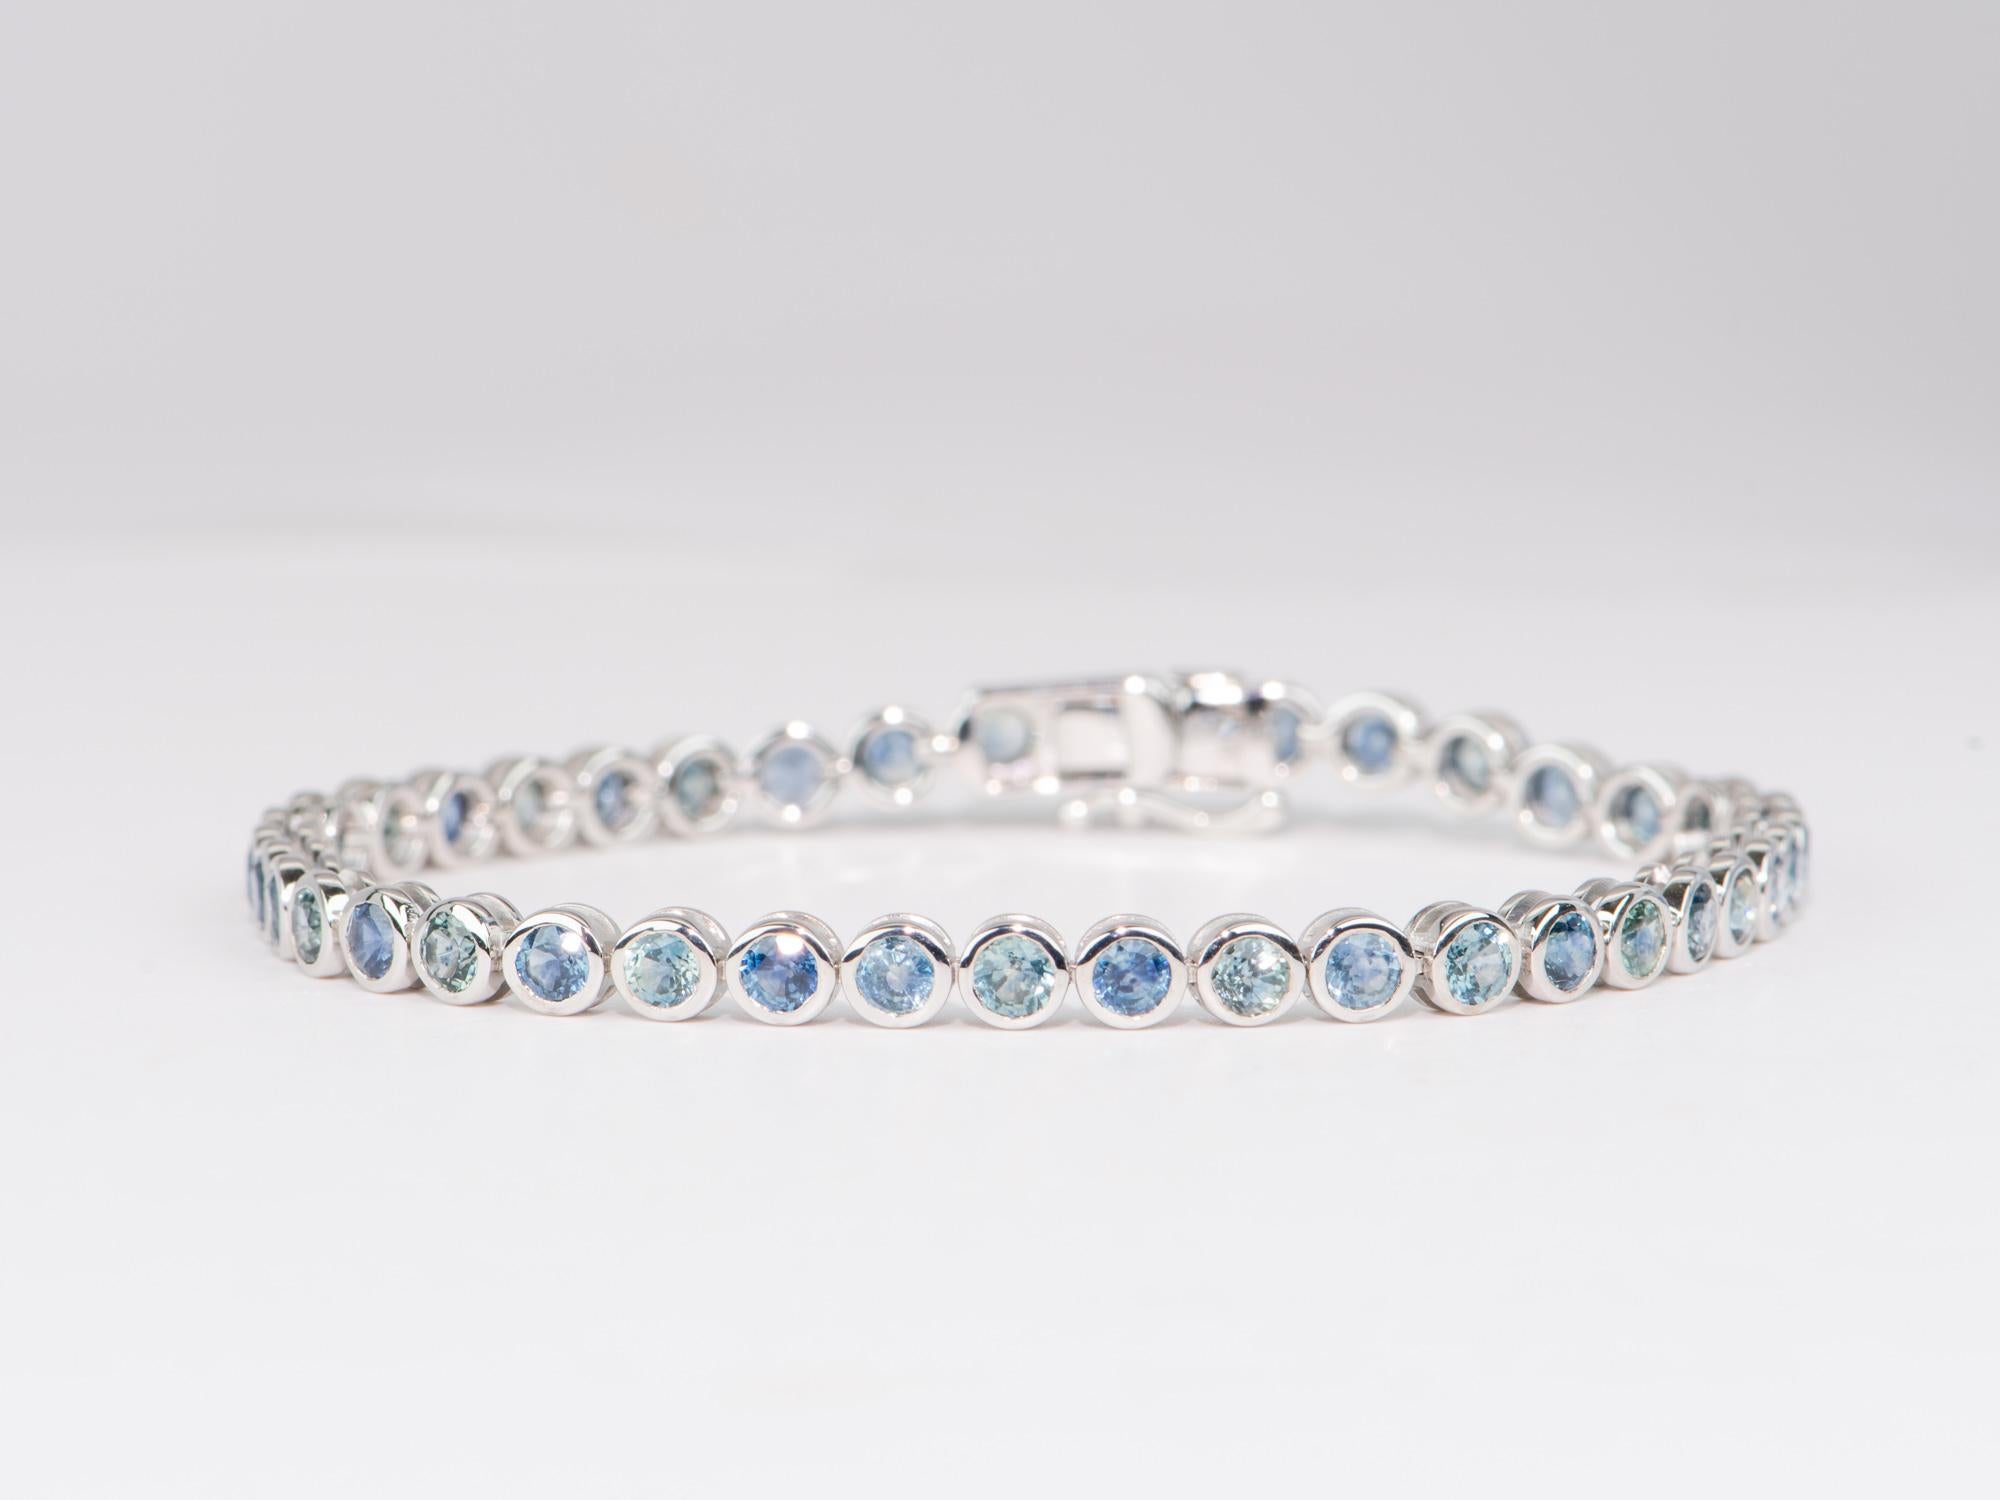 This sublime and exquisite Montana Sapphire Bezel Set Bracelet is crafted from 14K White Gold and set with breathtakingly brilliant sapphires, all mined in the USA. The soft blue sapphires create a refined and sensational look. Perfect for the